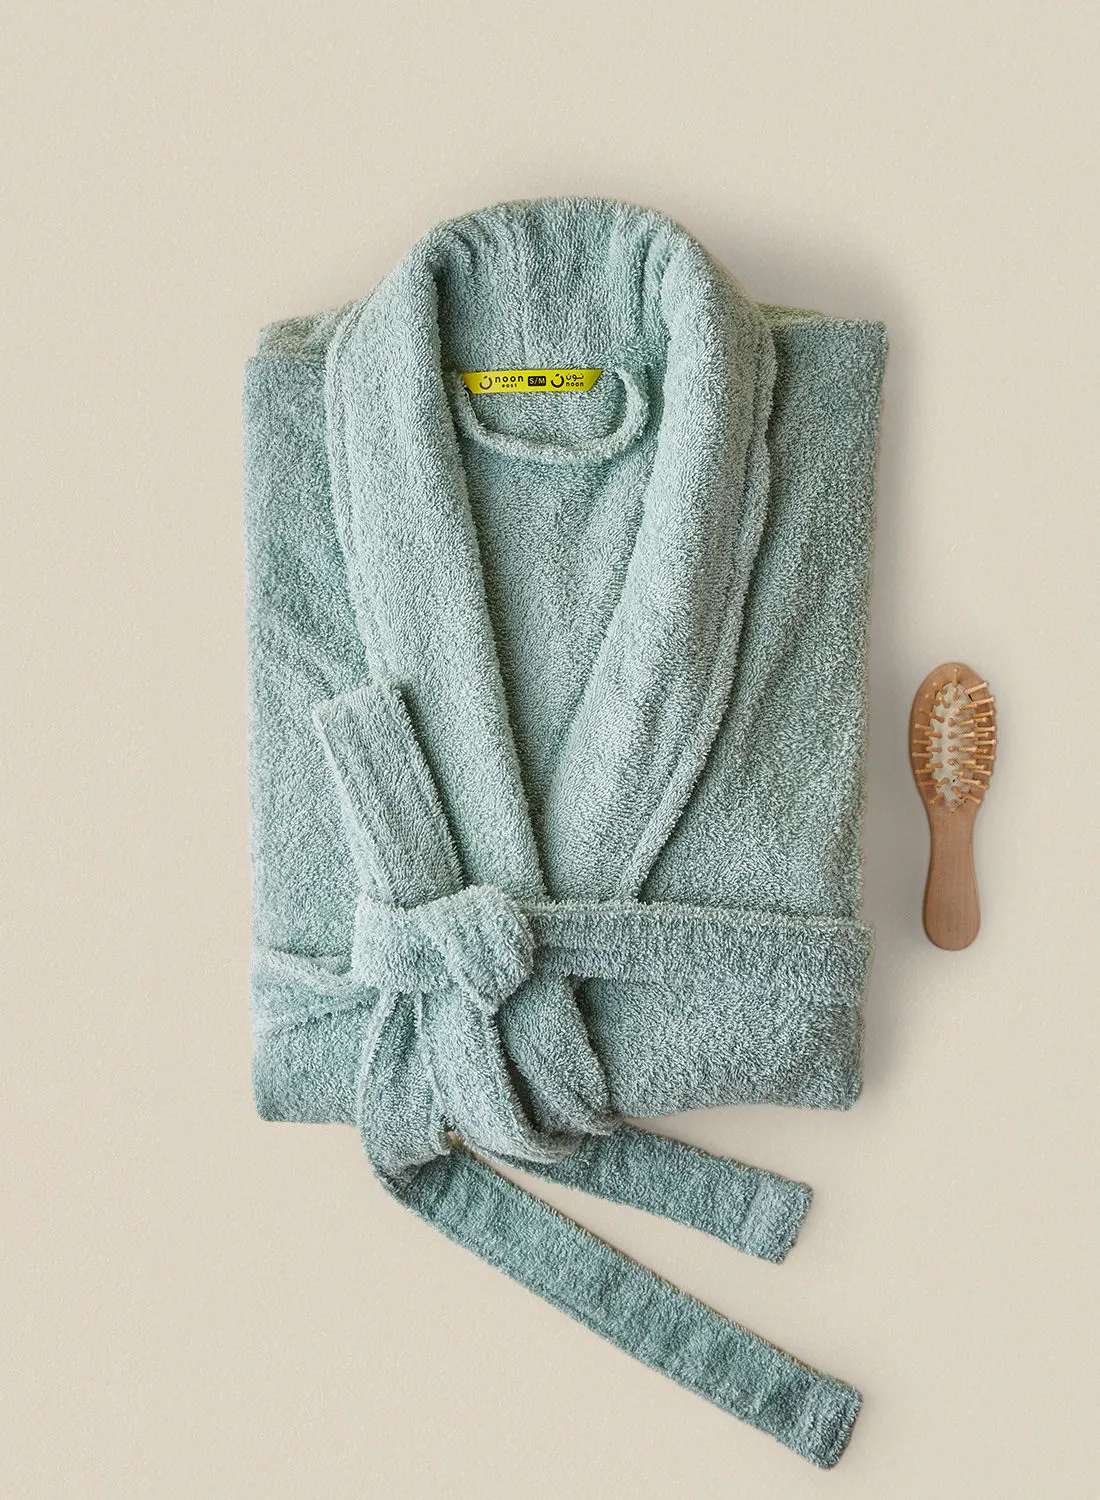 noon east Bathrobe - 380 GSM 100% Cotton Terry Silky Soft Spa Quality Comfort - Shawl Collar & Pocket - Surf Color - 1 Piece